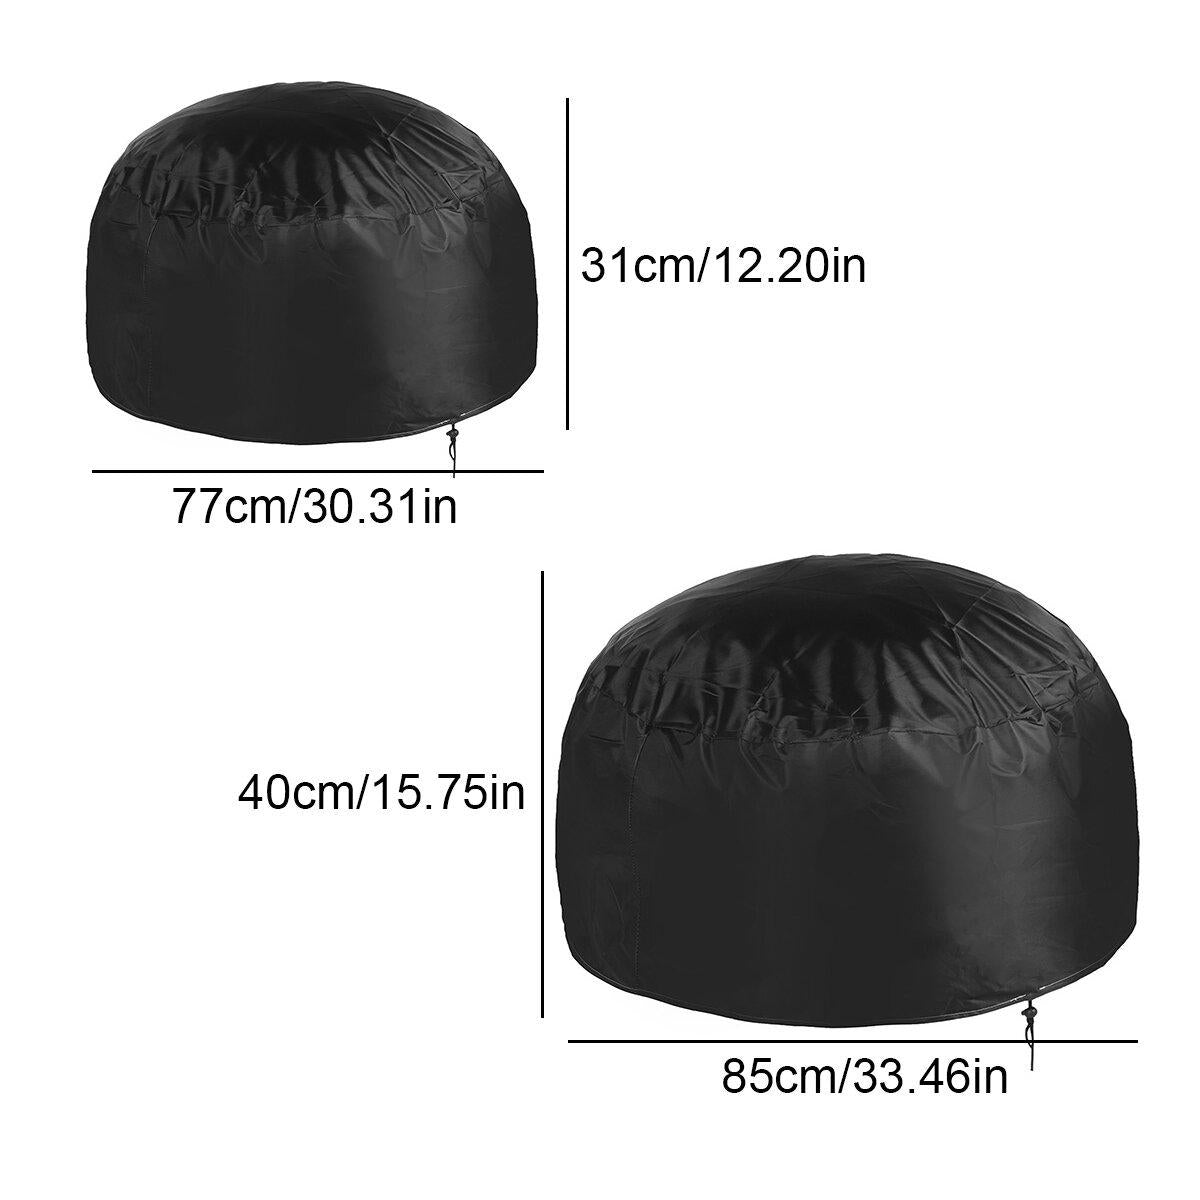 BBQ Gill Cover Waterproof UV Protector Gas Charcoal Burner Round Cover Outdoor Camping Picnic